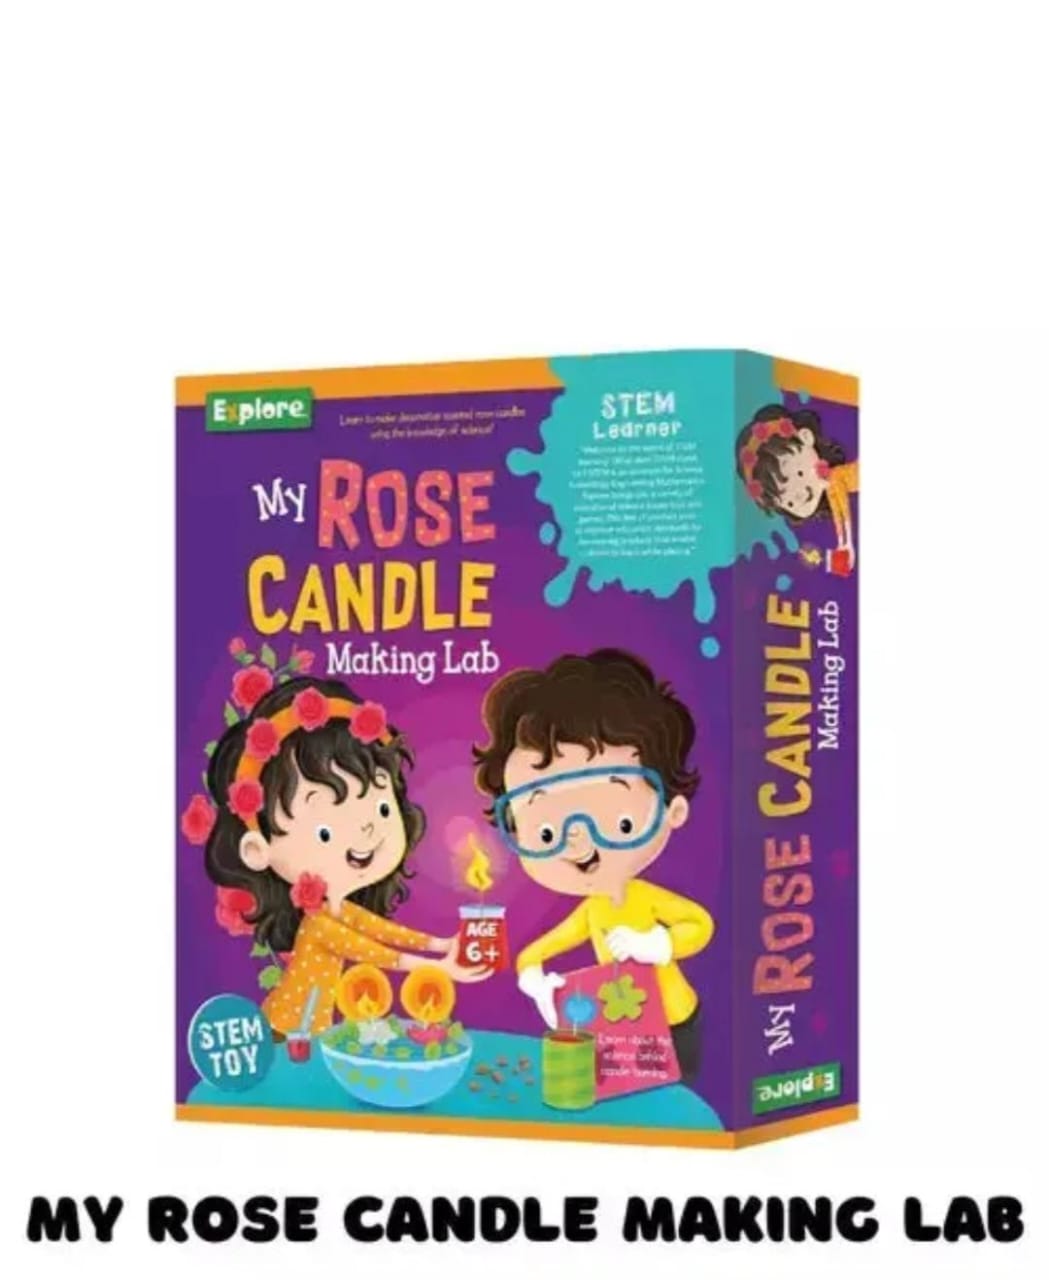 DIY Activity Games - Rose Candle Making